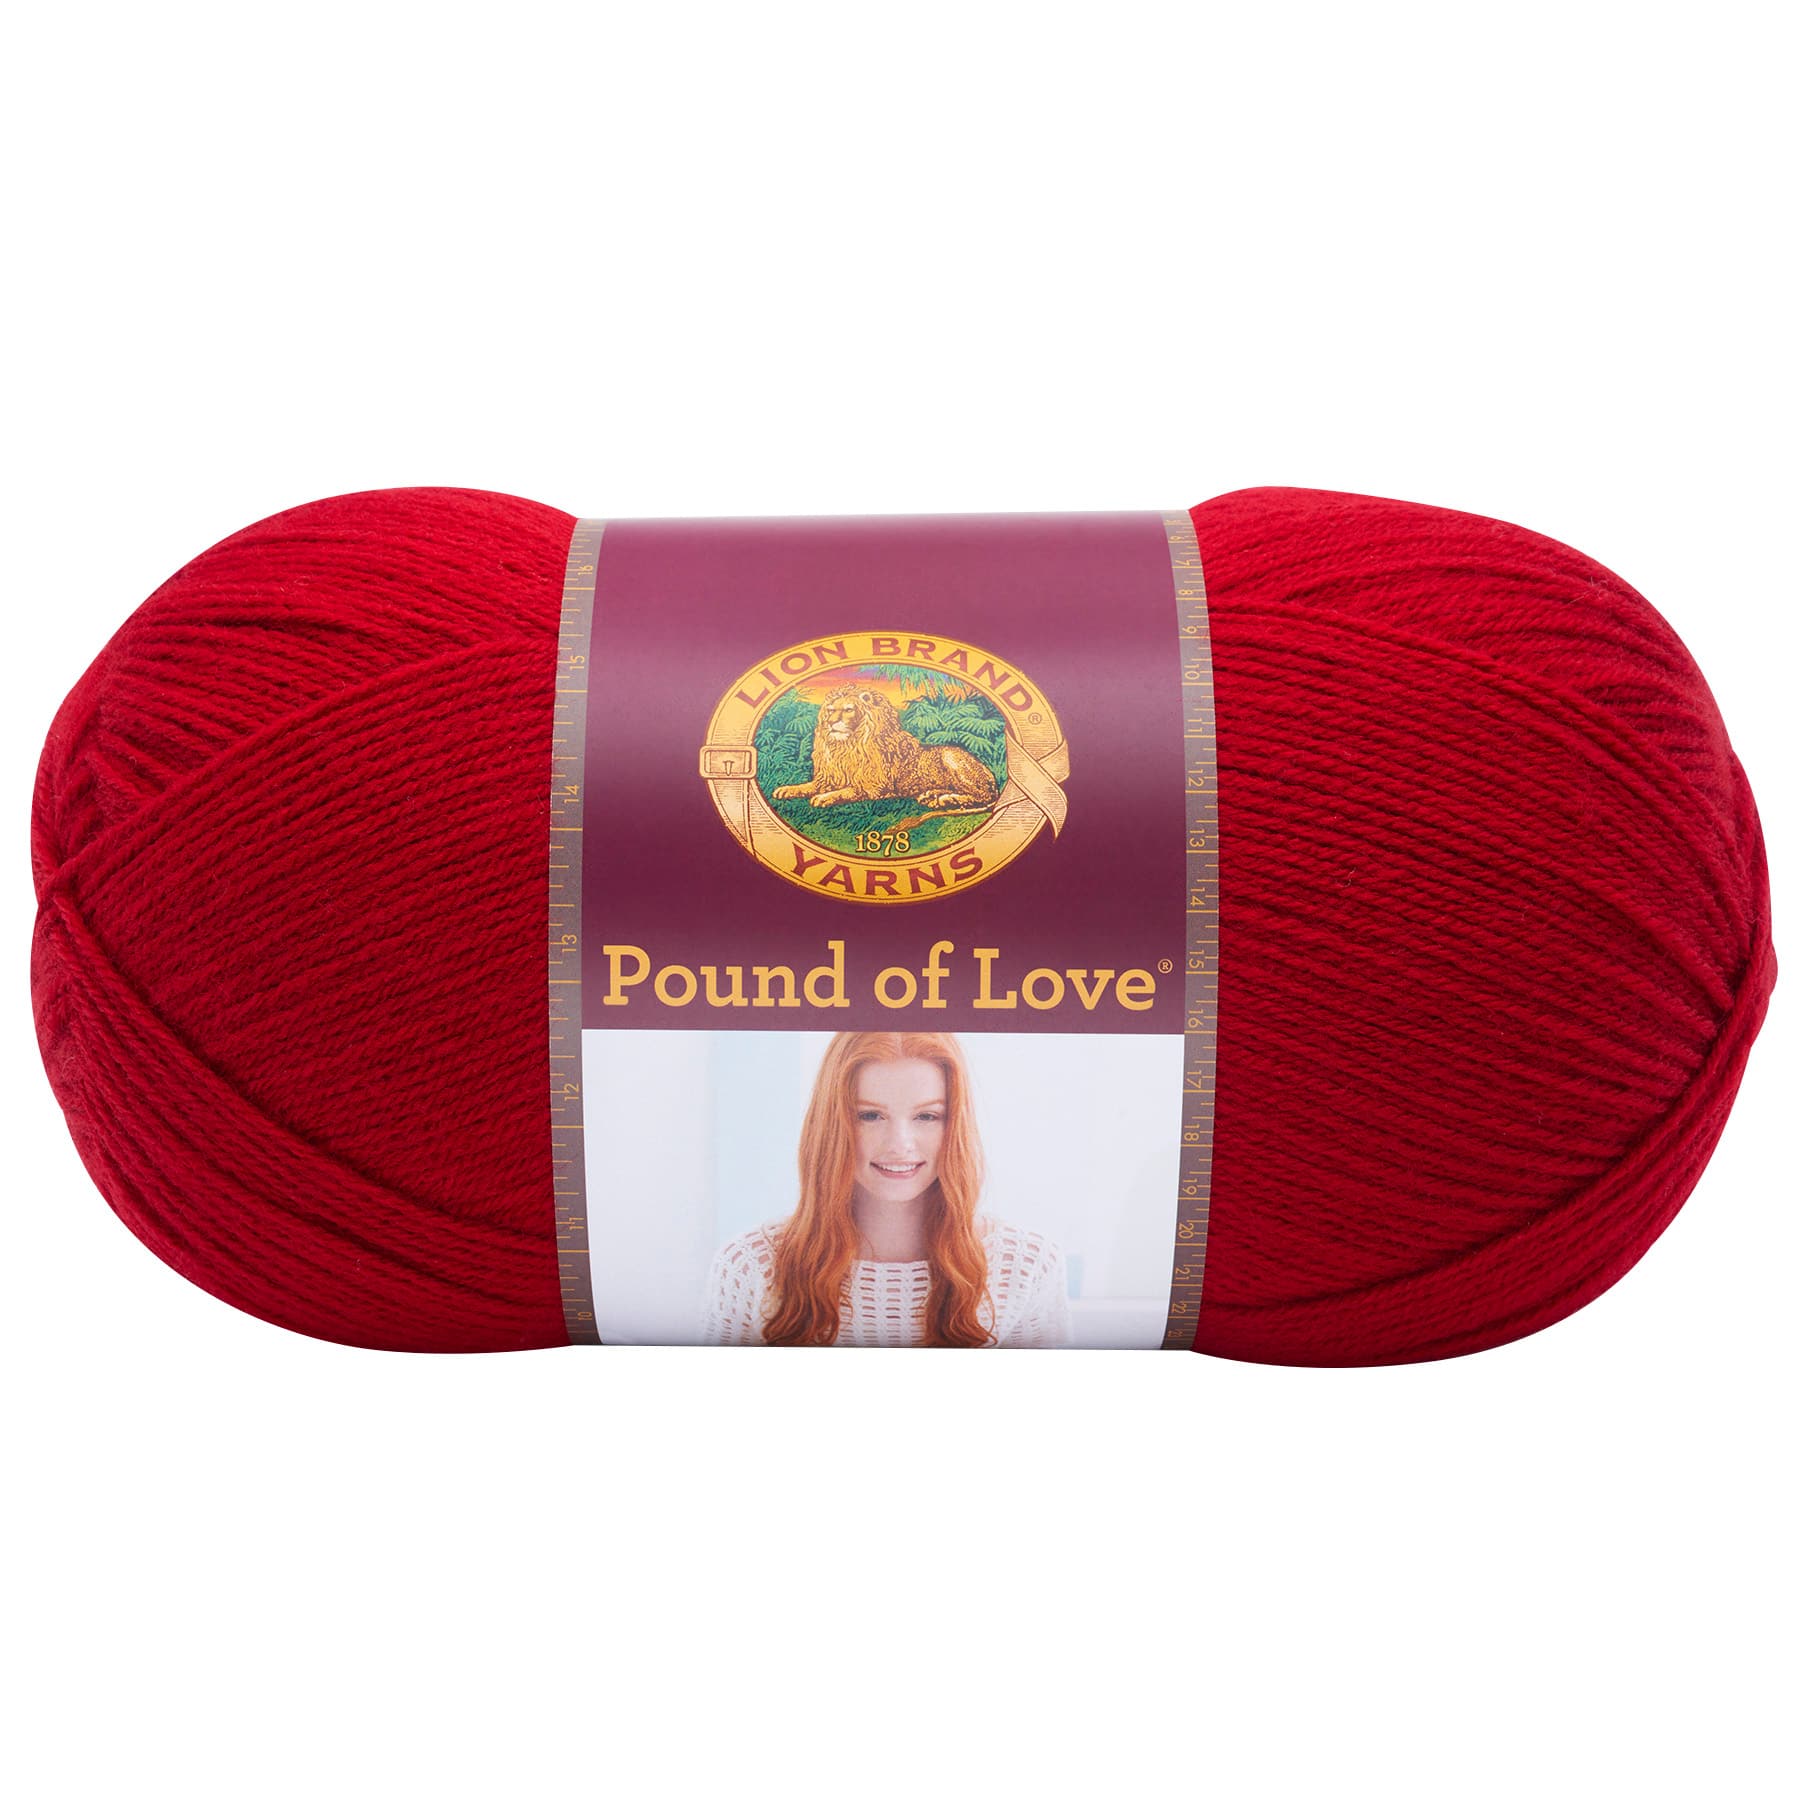 Lion Brand Pound of Love precuts your yarn for you! Thanks! 🤦🏻‍♀️ :  r/crochet